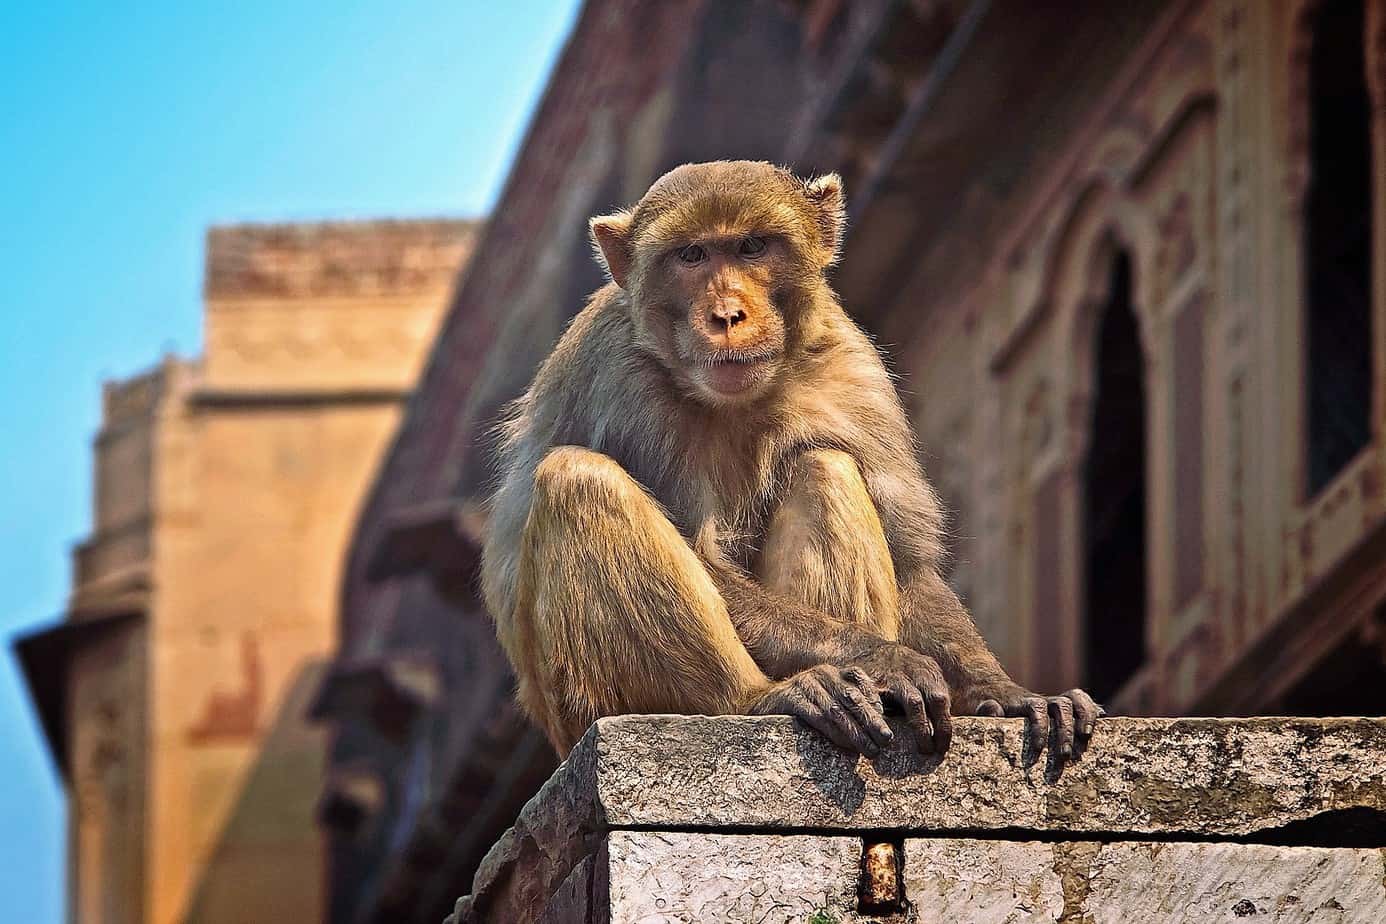 Monkey business: The oft-ignored menace in our cities - Citizen Matters